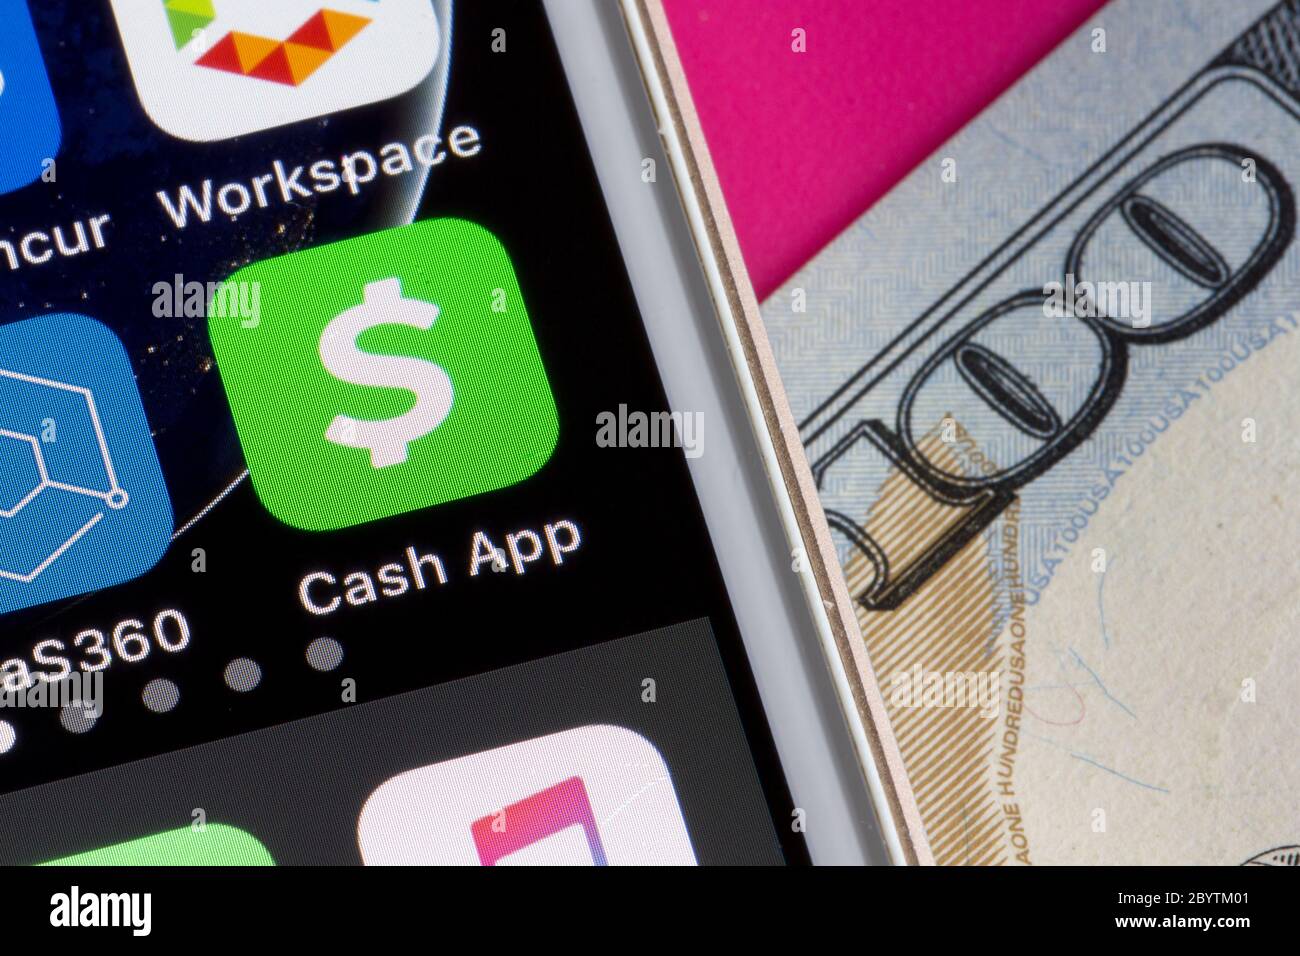 Cash App icon is seen on a smartphone. The mobile payment service is developed by Square Inc. Stock Photo